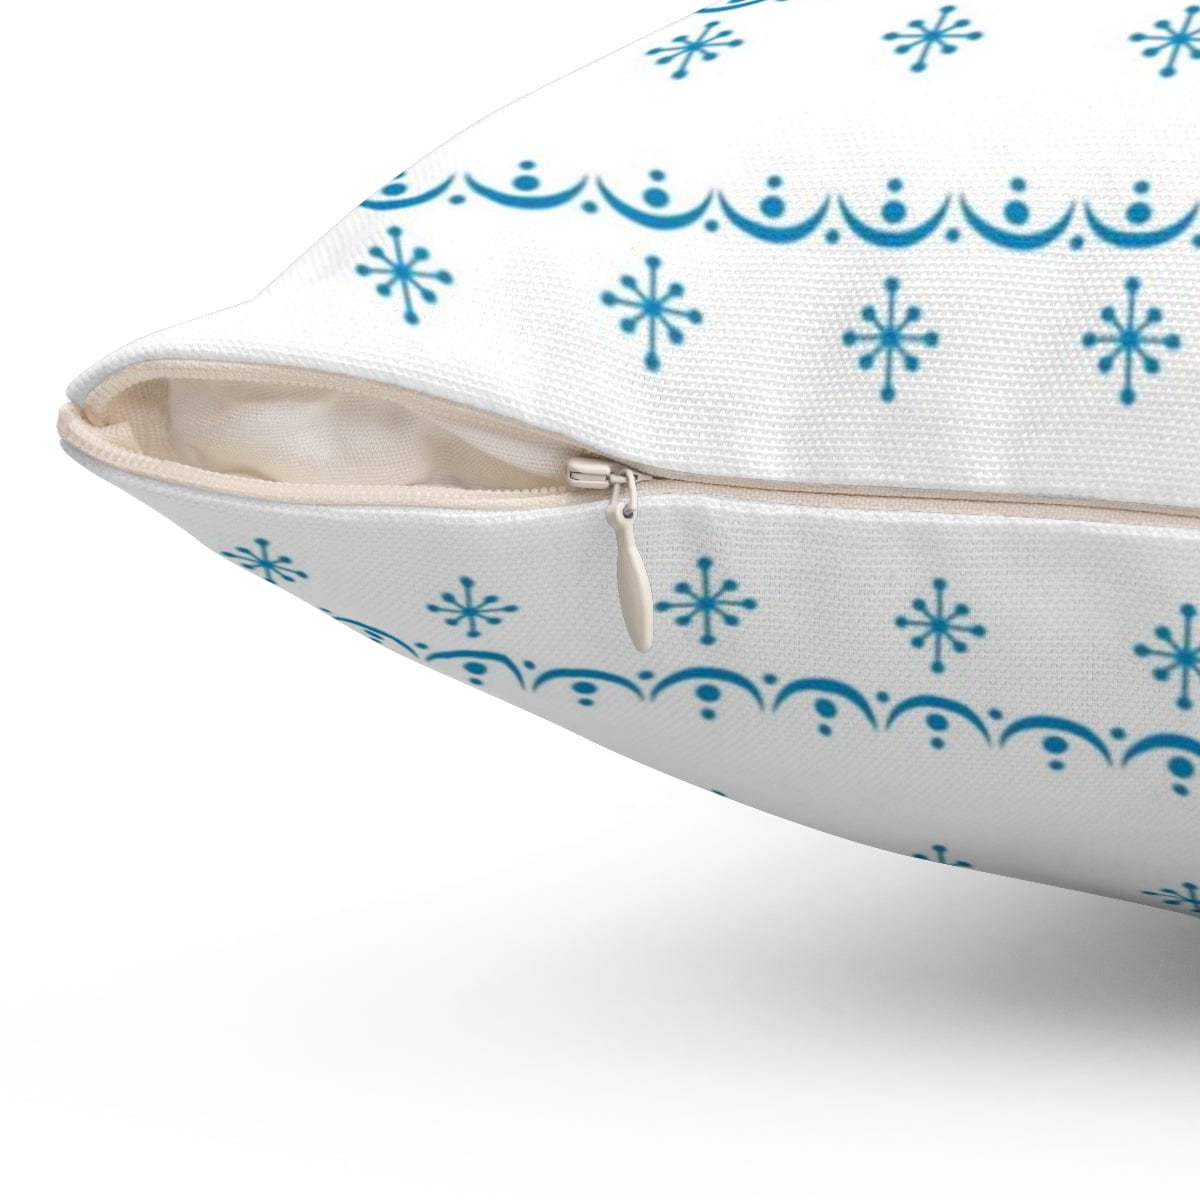 Retro Garland Snowflake, Mid Mod Blue, White, Mid Mod Pyrex Lover Collector Pillow And Insert Home Decor